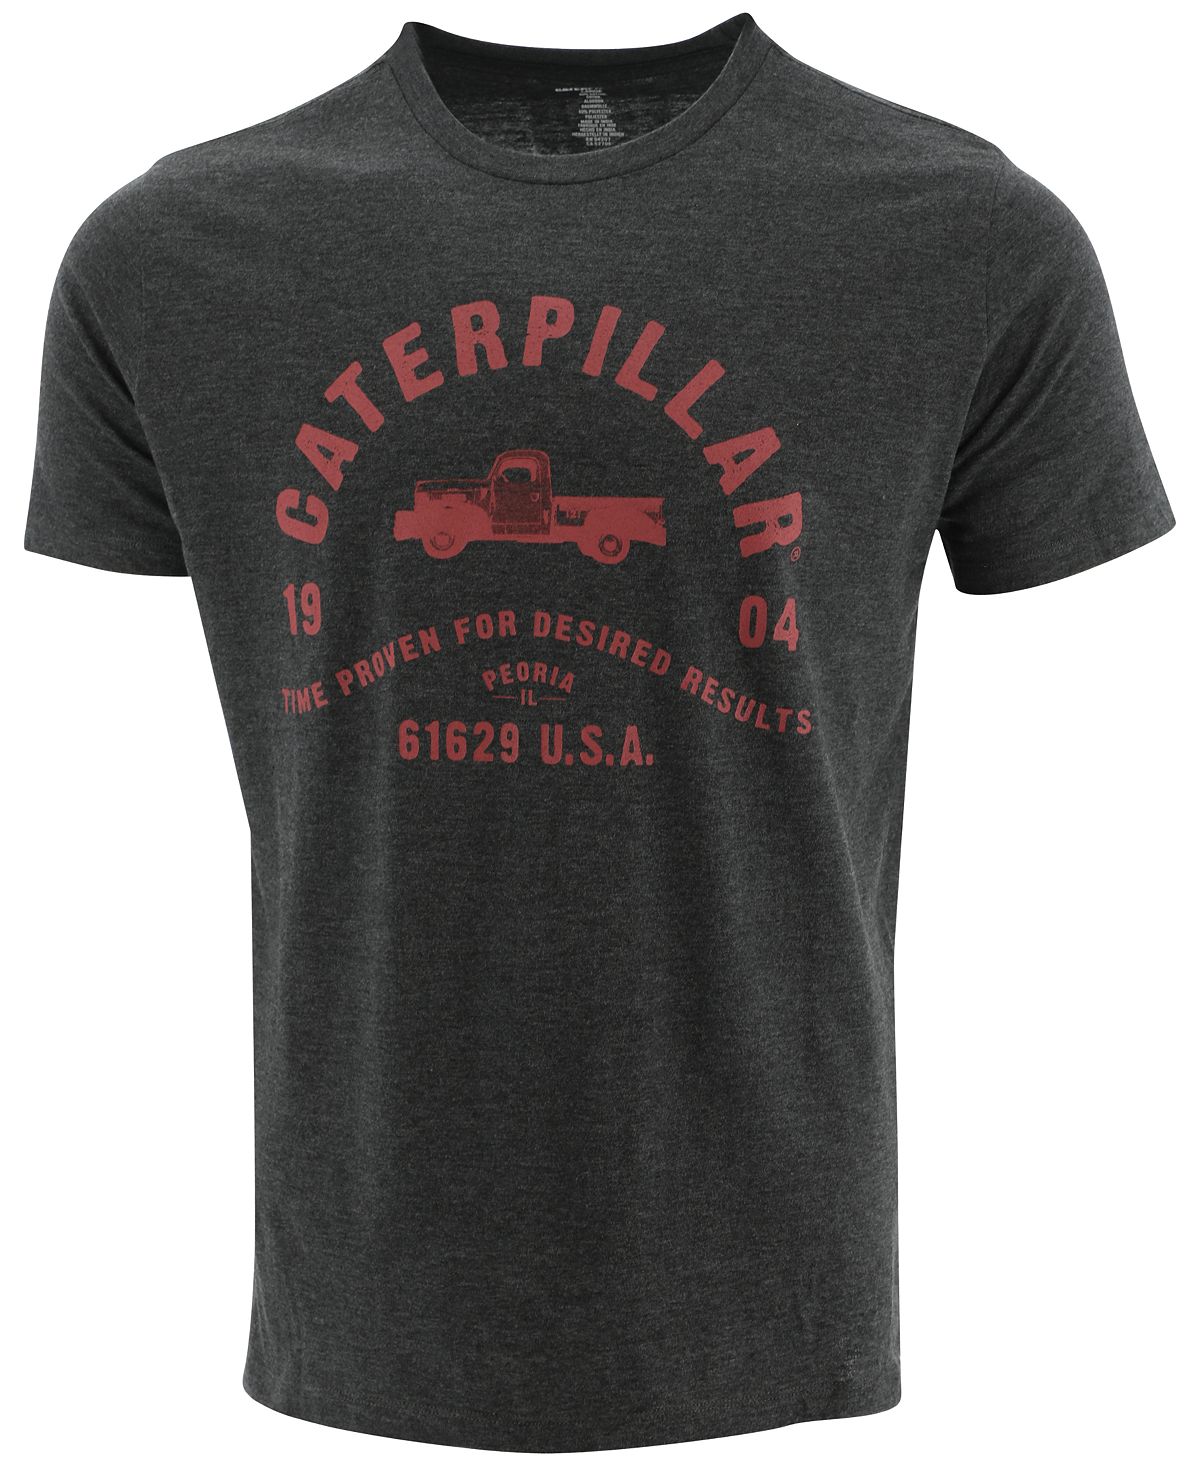 Caterpillar Foundation Time Proven Logo Graphic T-shirt Pitch Black Heather